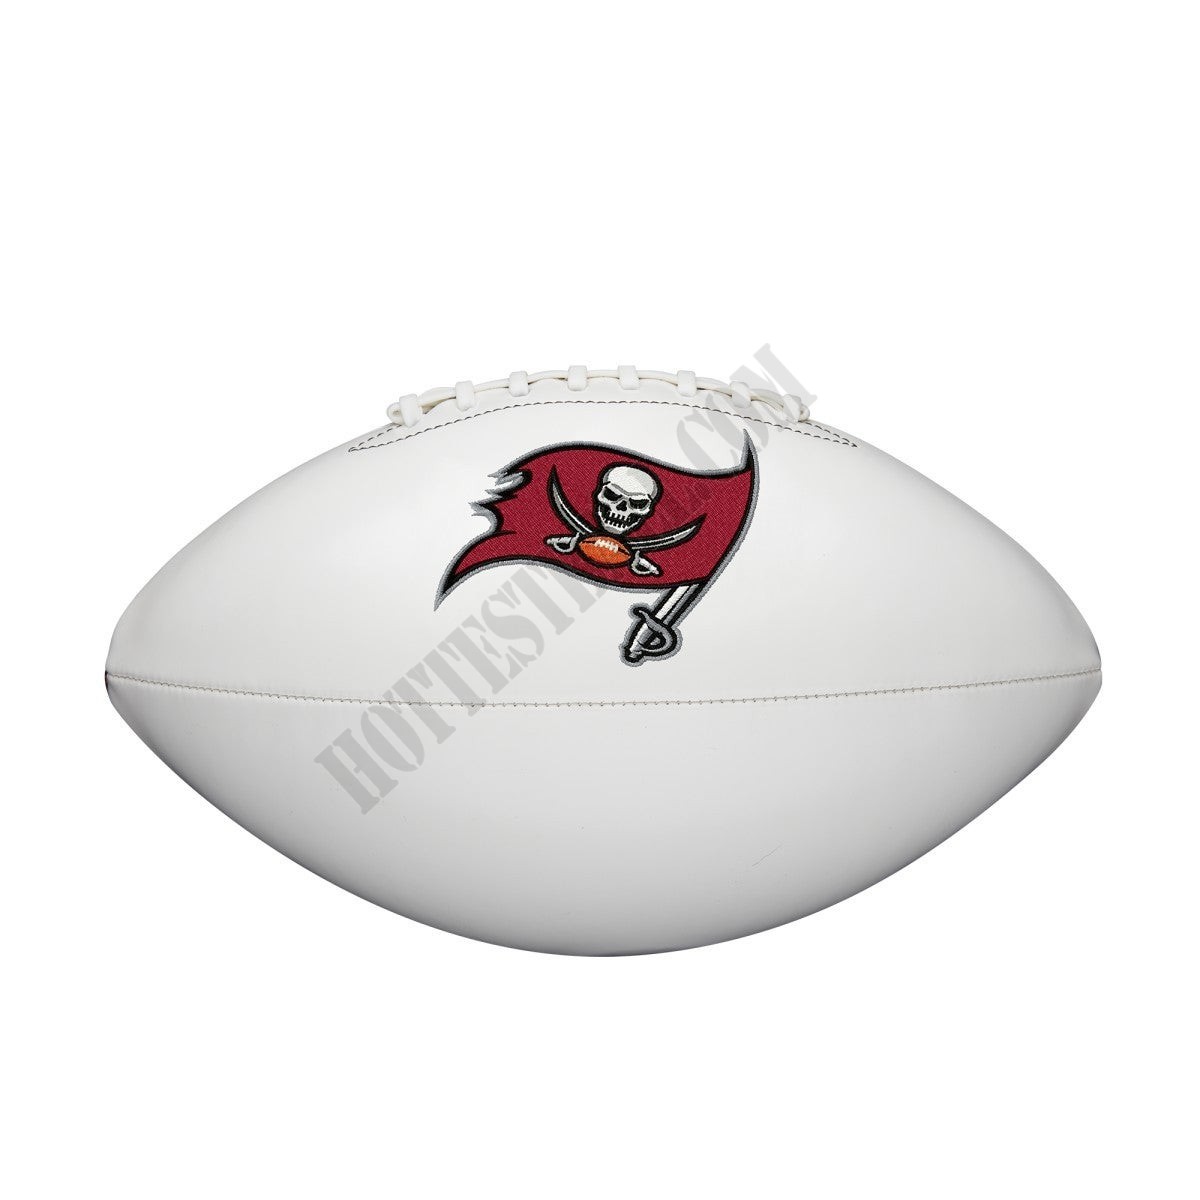 NFL Live Signature Autograph Football - Tampa Bay Buccaneers ● Wilson Promotions - -4